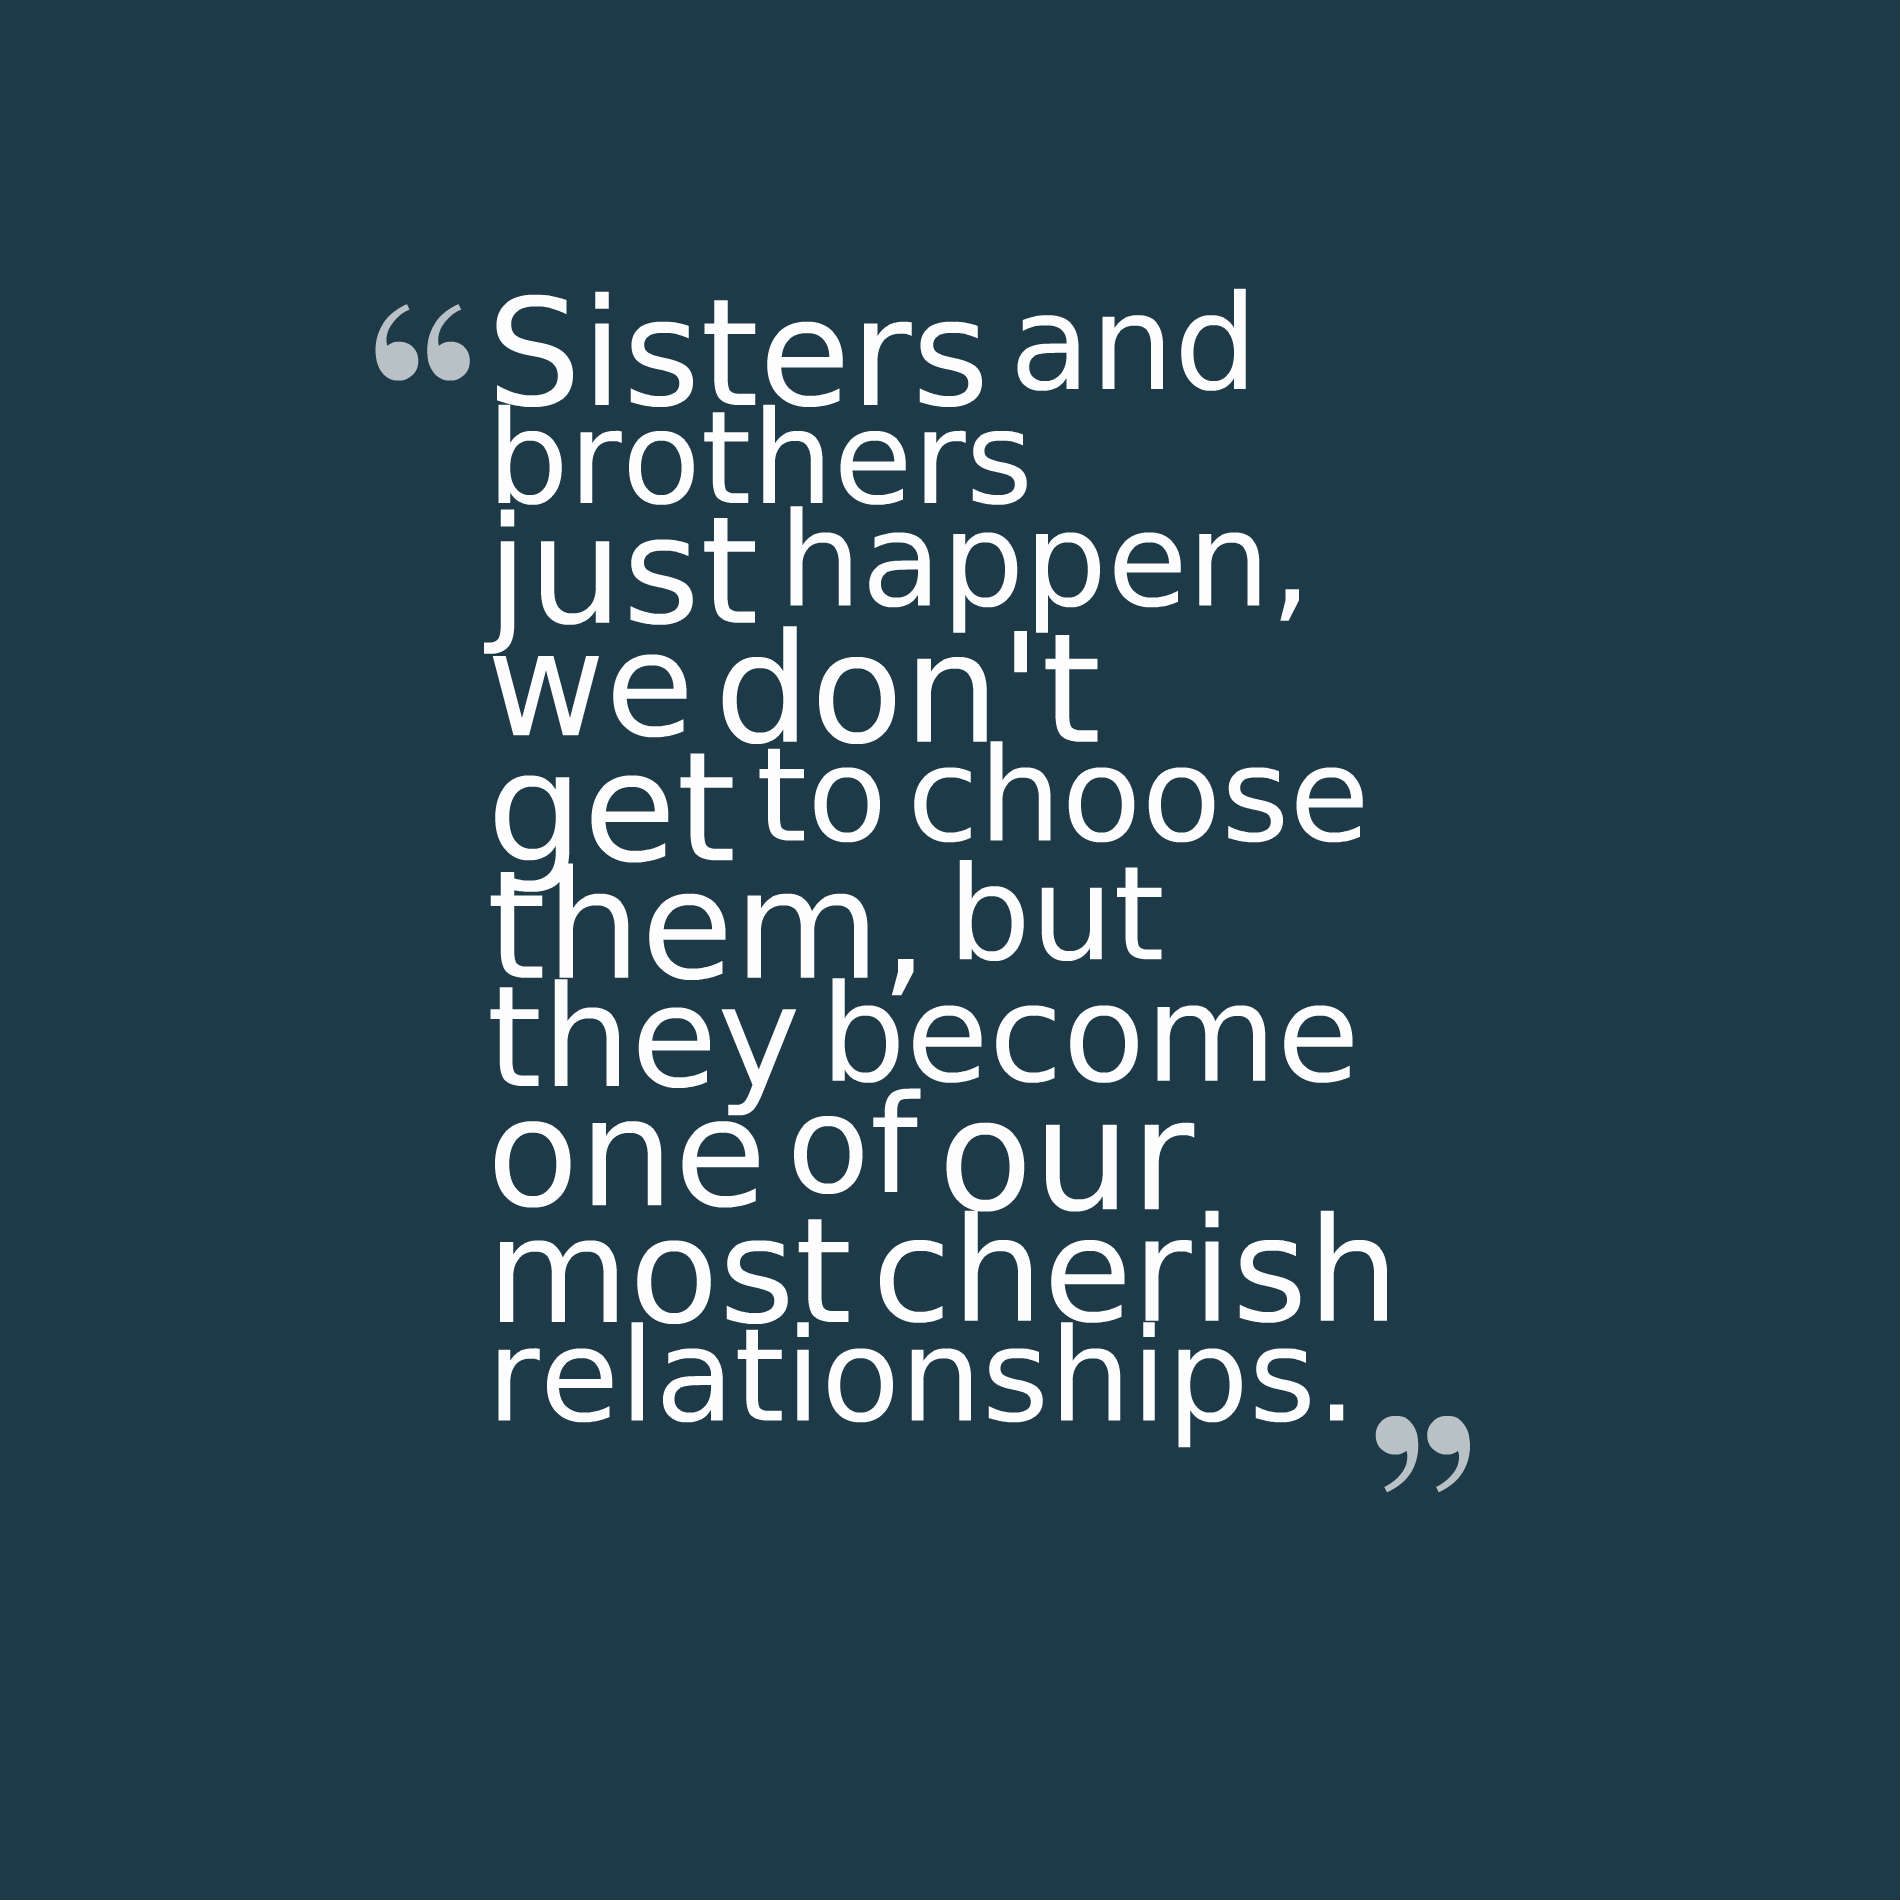 Sisters and brothers just happen, we don't get to choose them, but they become one of our most cherish relationships.